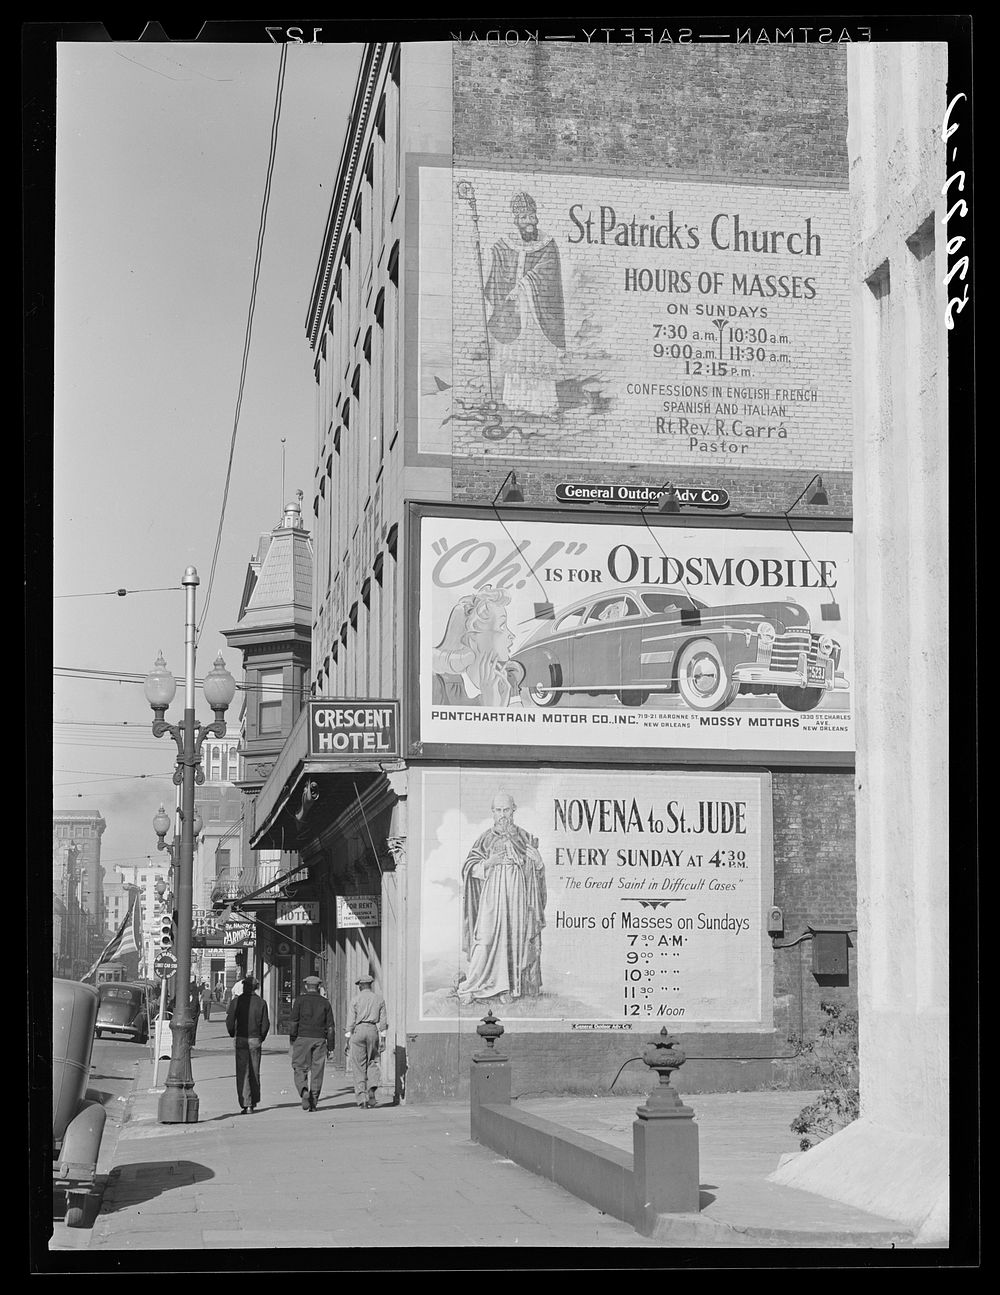 Billboards on side of building in New Orleans, Louisiana. Sourced from the Library of Congress.